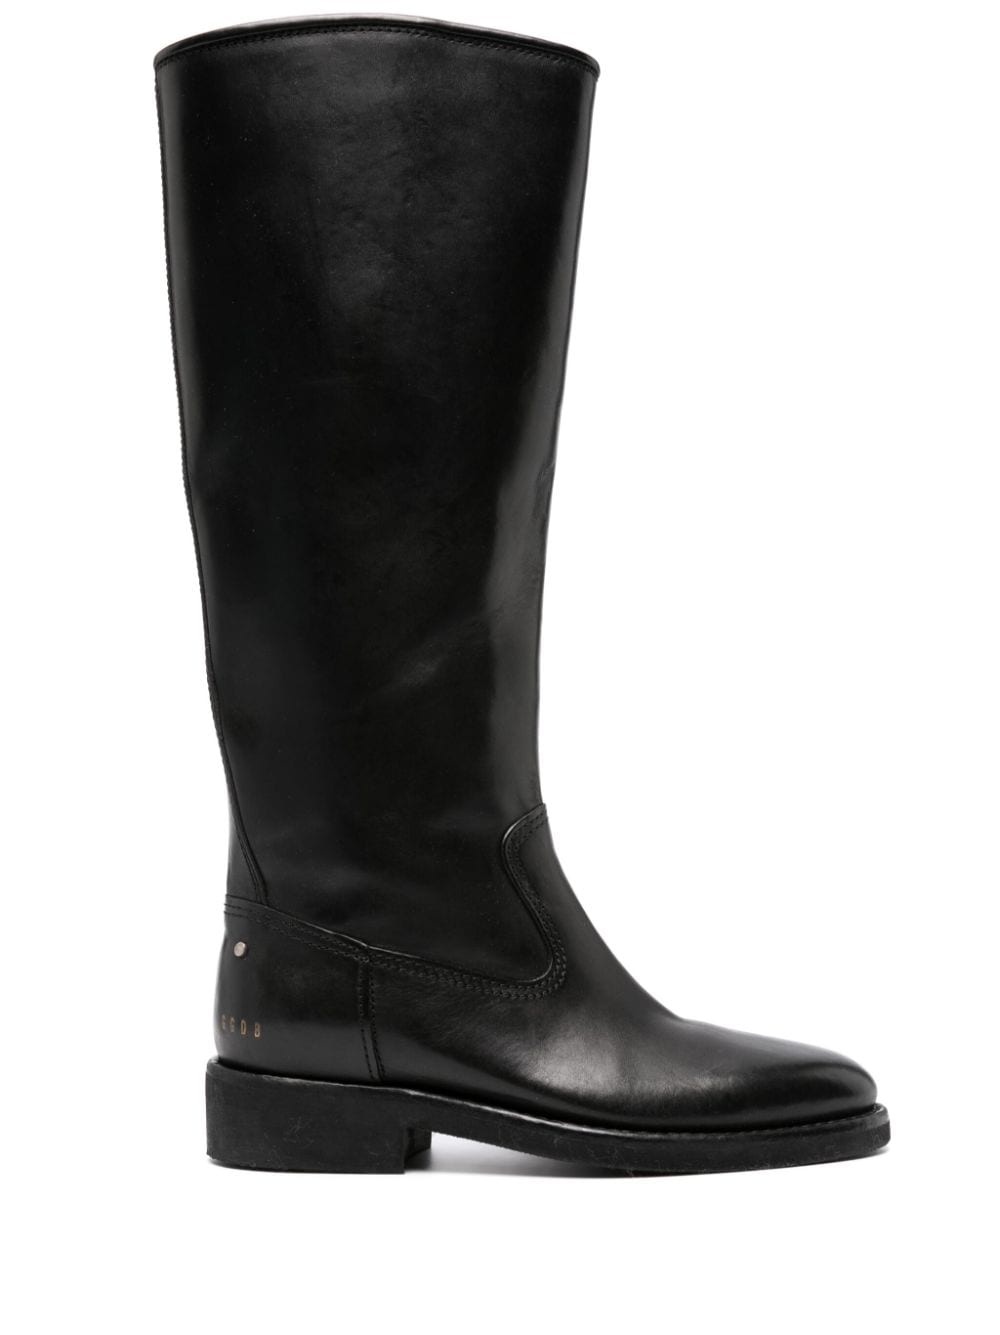 35mm leather riding boots - 1